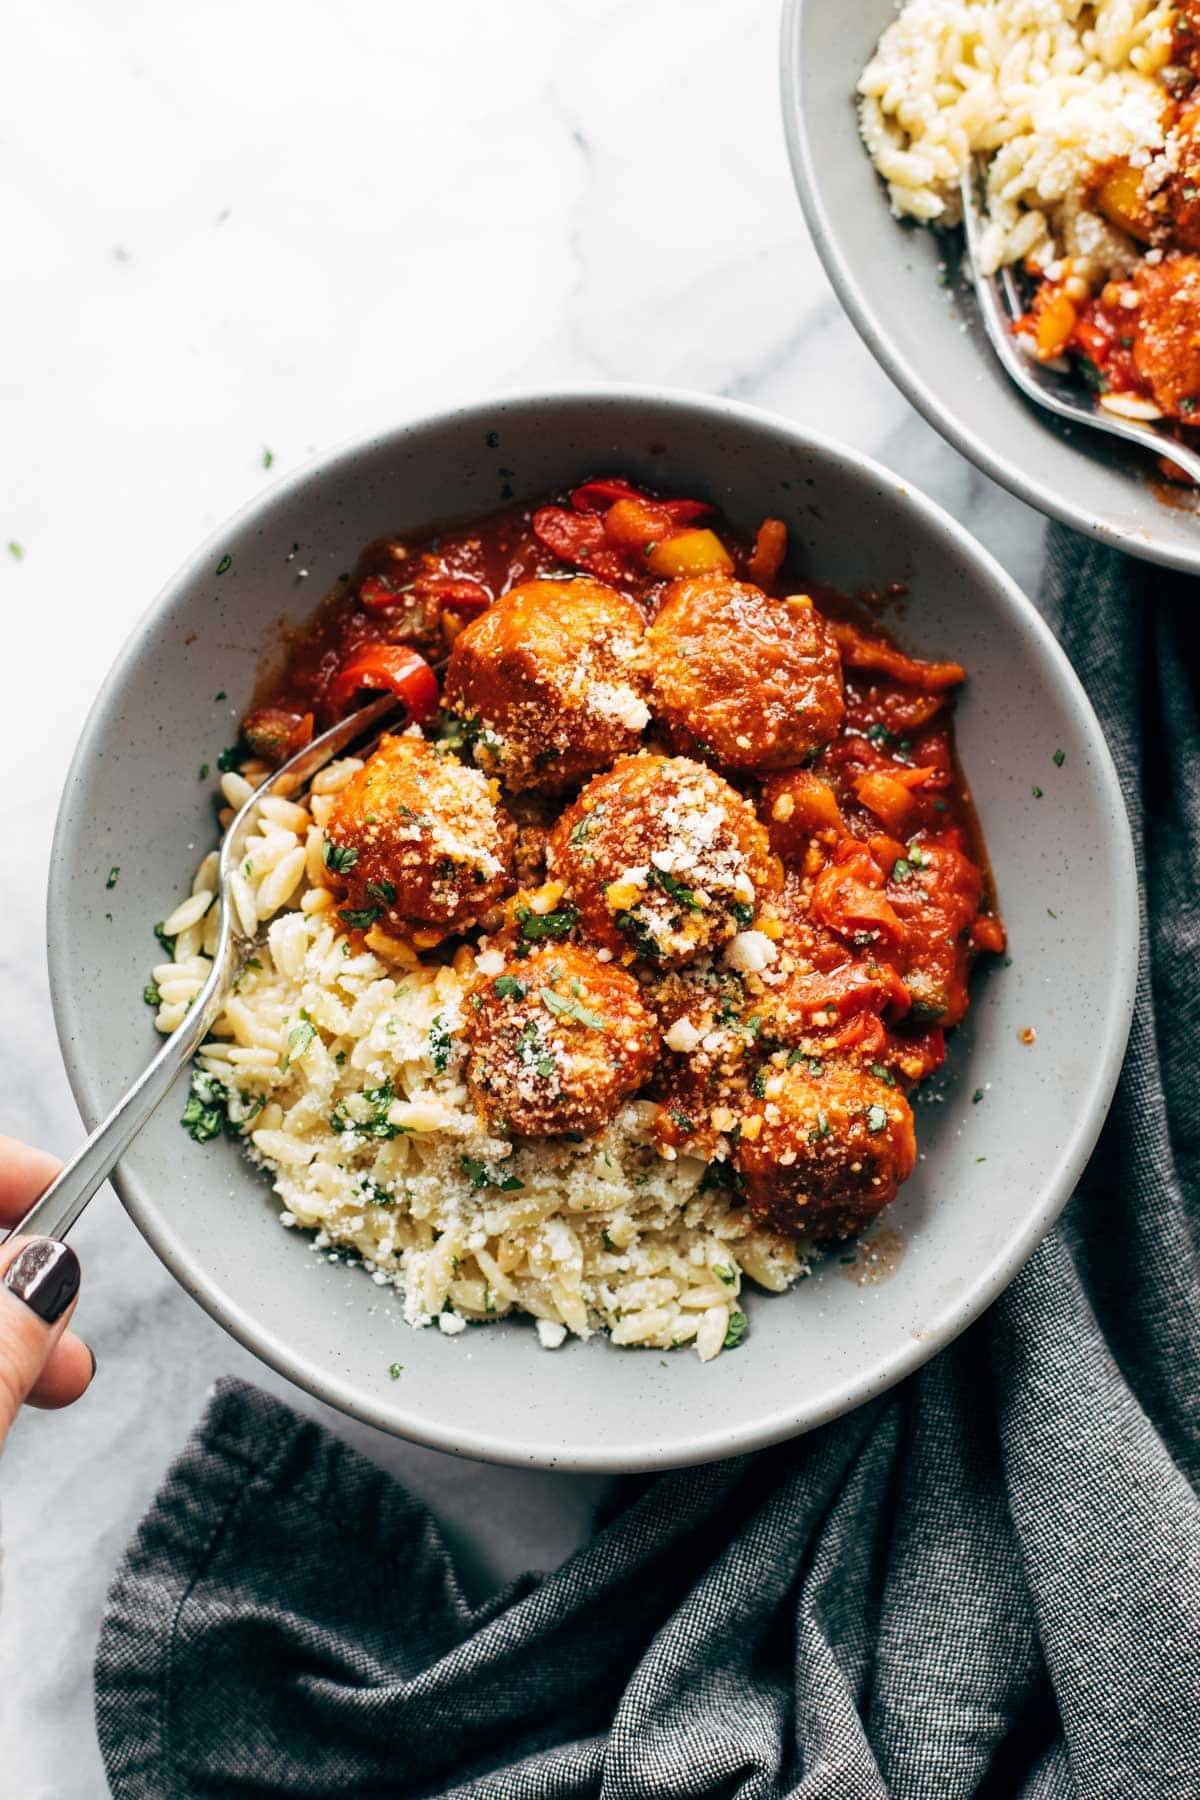 Chicken meatballs with peppers and orzo in a bowl.